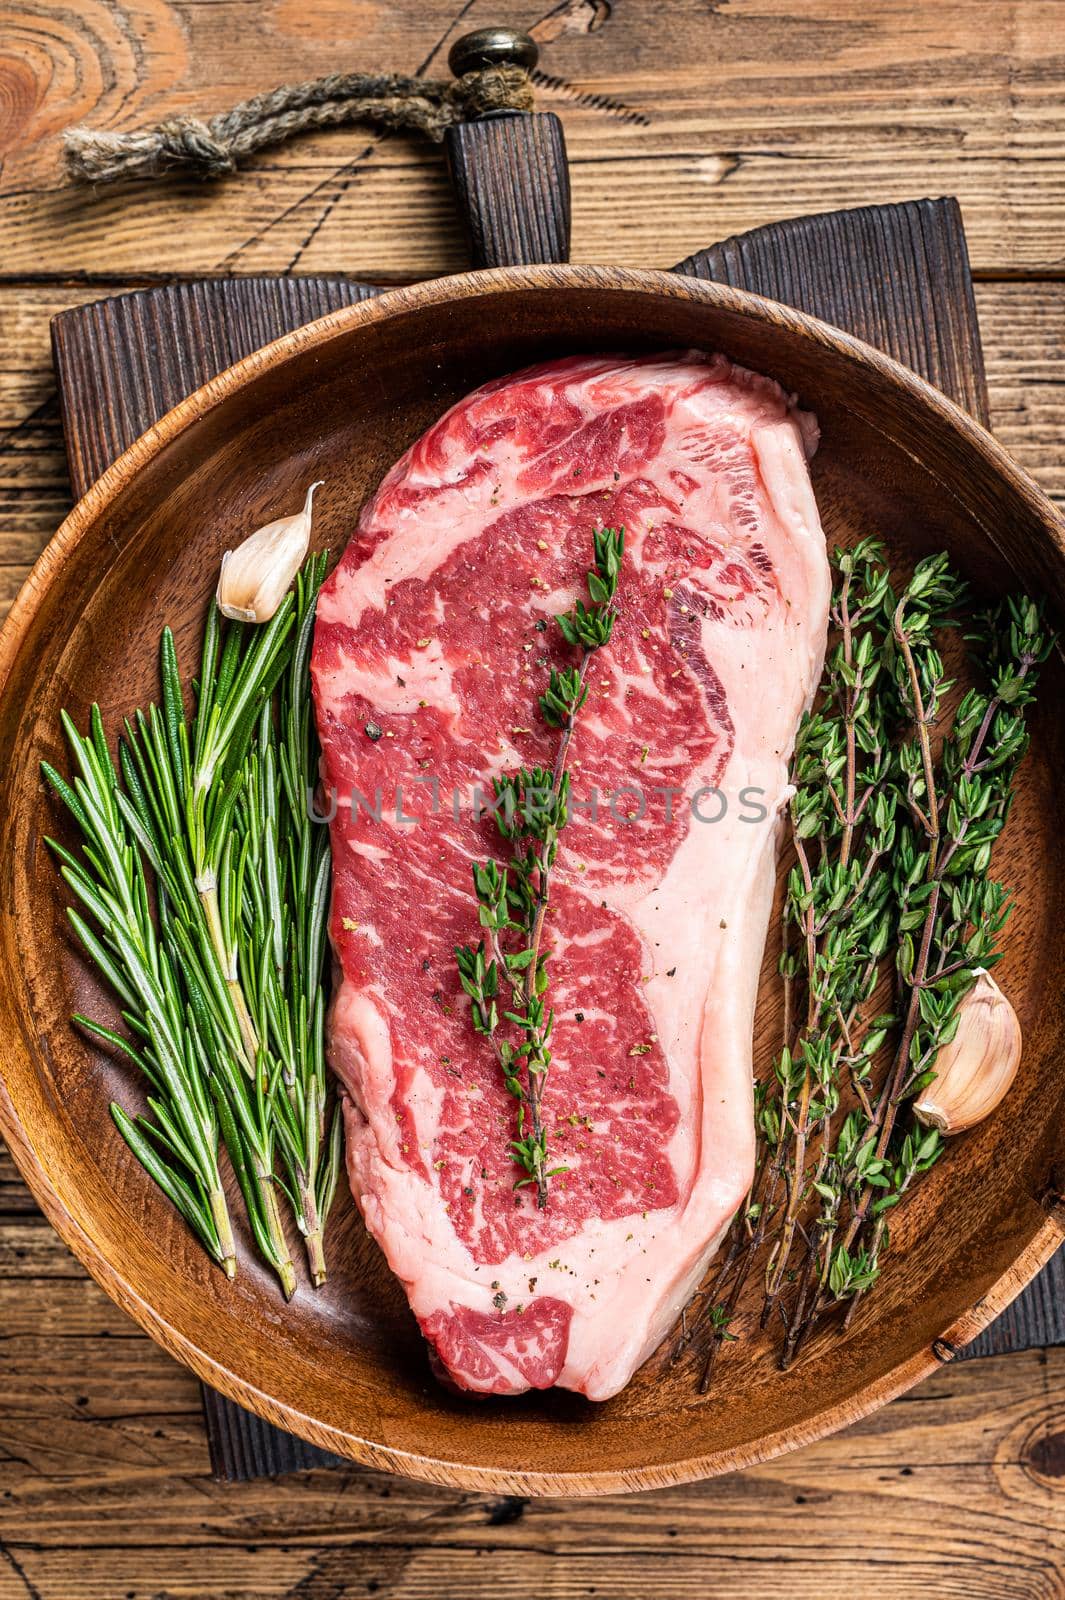 Fresh new york strip beef meat steak or striploin in a wooden plate with herbs. wooden background. Top view.